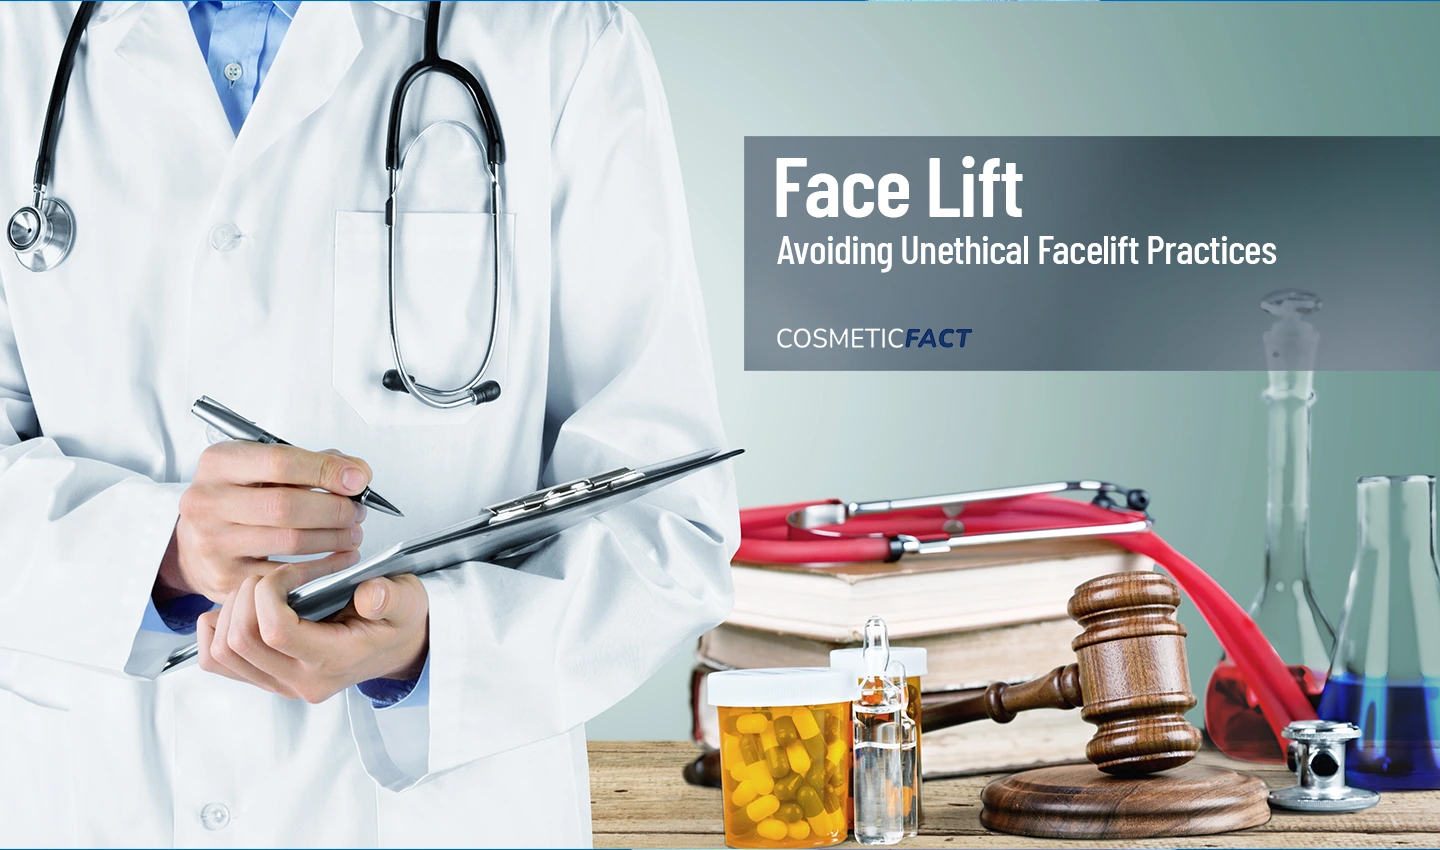 Doctor writing about ethical facelift practices in a notebook. By including the focus keyphrase "Ethical Facelift" in each item, you will improve the SEO optimization of the image and help search engines better understand what the image is about